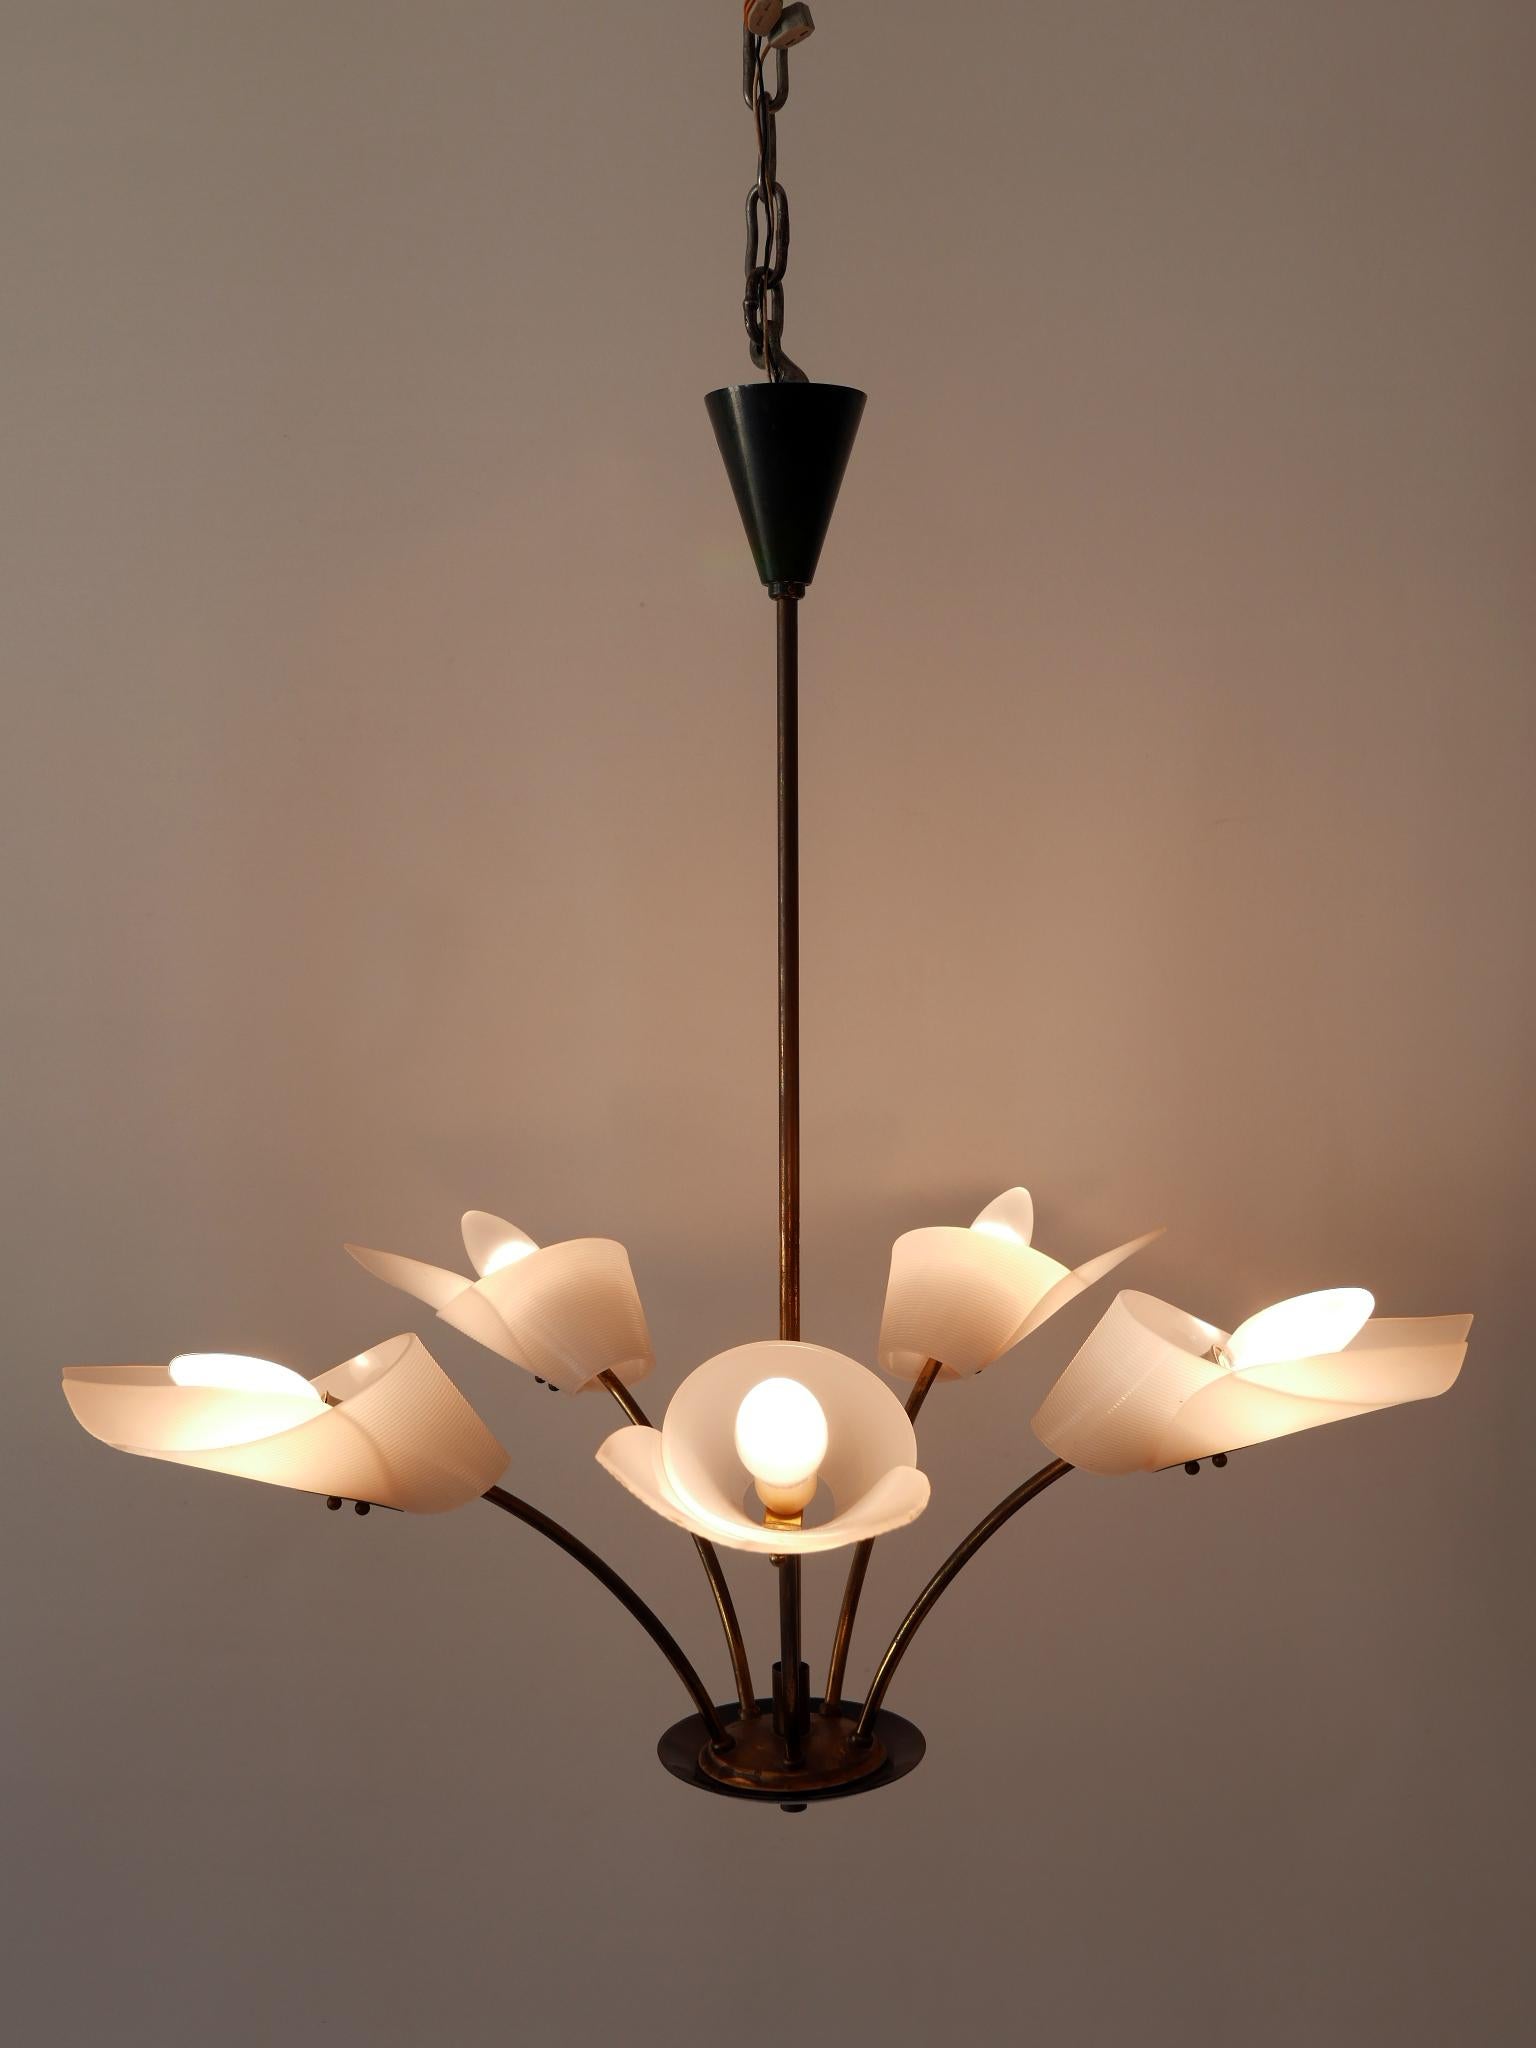 Gorgeous, highly decorative Mid-Century Modern five-armed chandelier or pendant lamp. Designed & manufactured in Germany, 1950s.

Executed in brass and acrylic glass, the pendant lamp/chandelier needs 5 x E14 / E12 Edison screw fit bulbs. It is